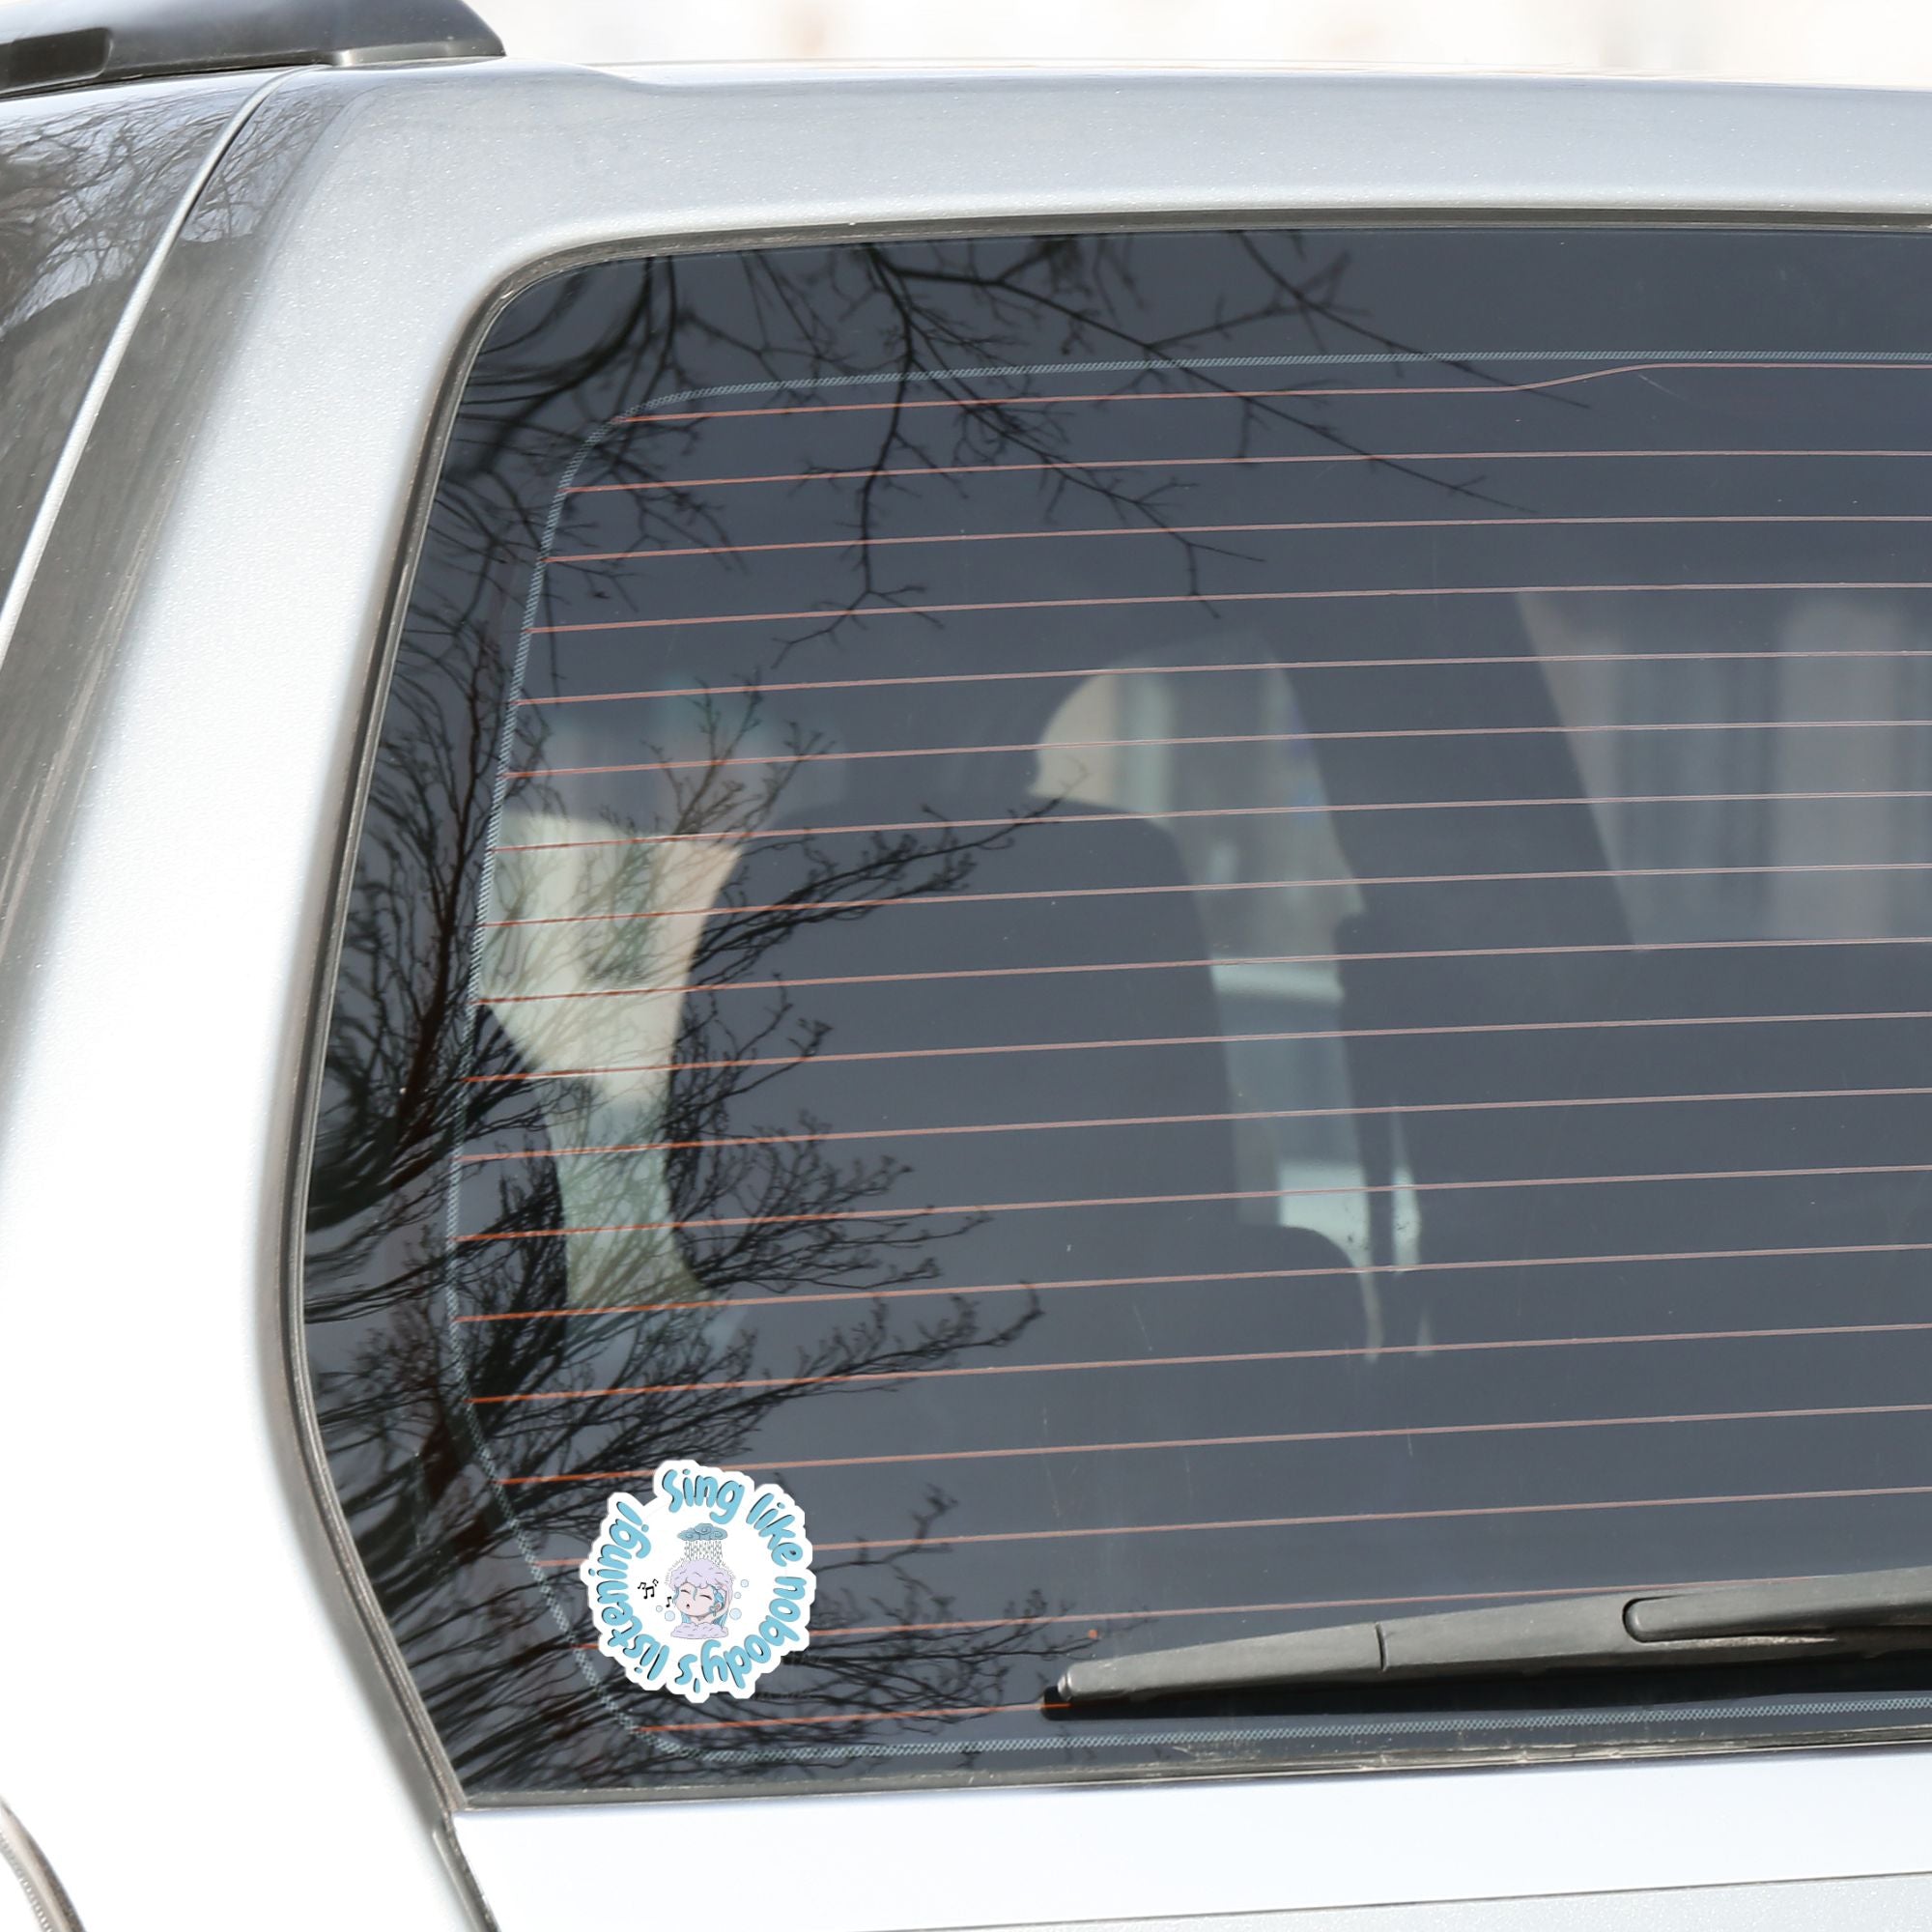 Sing like nobody's listening; dance like nobody's watching. This blue, gray, and white individual die-cut sticker features someone singing in the shower. This image shows the Sing like nobody's listening die-cut sticker on the back window of a car.